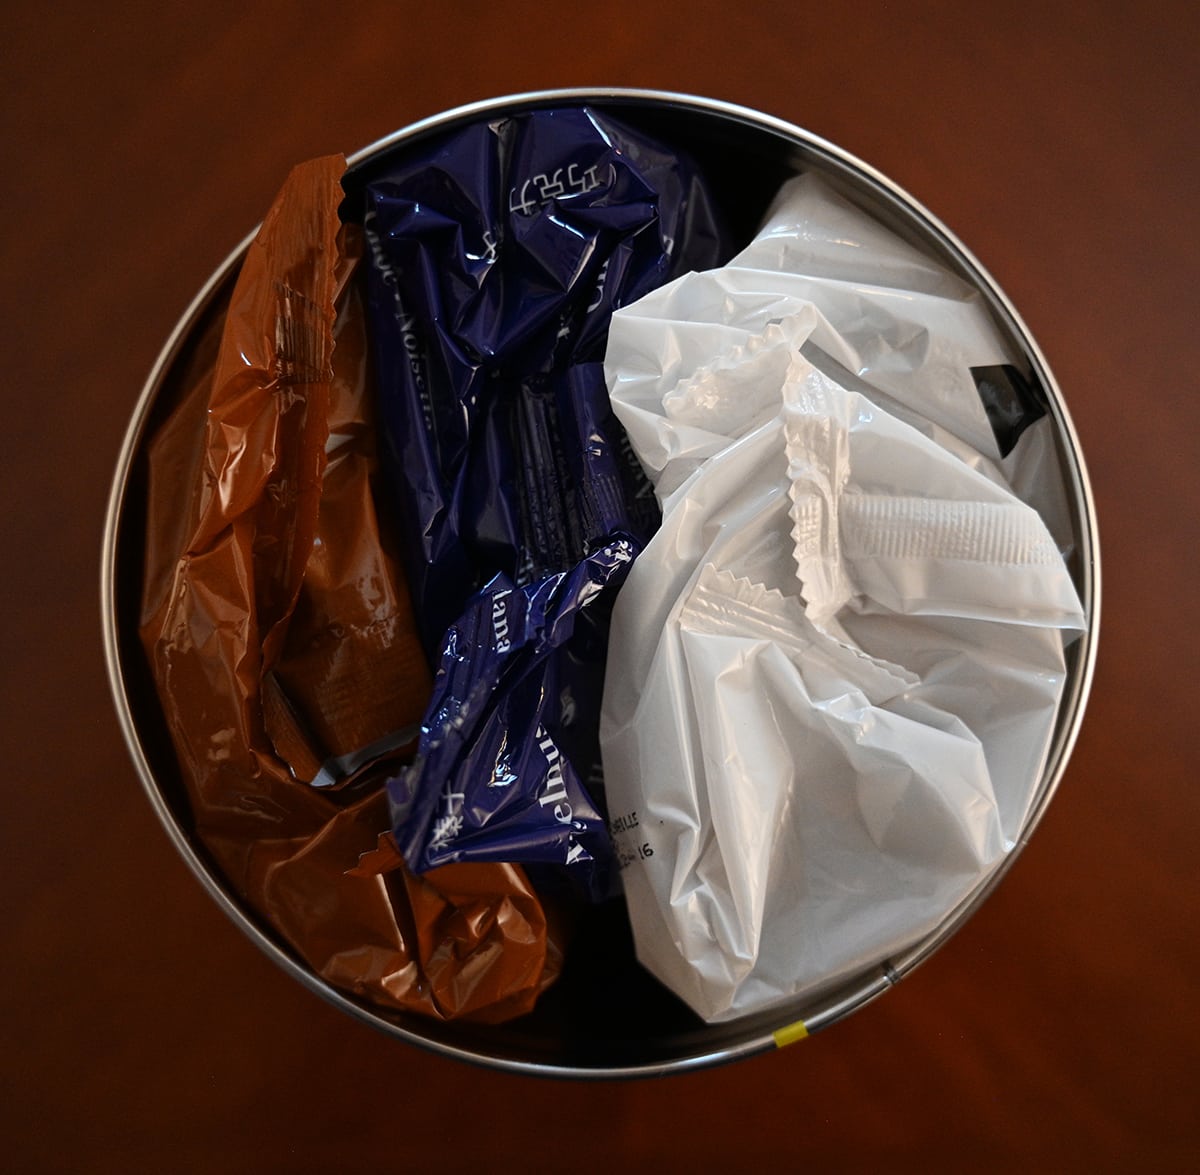 Top down image of the open tin of Rondoletti showing three unopened bags (white, blue and brown) stuffed inside the tin.